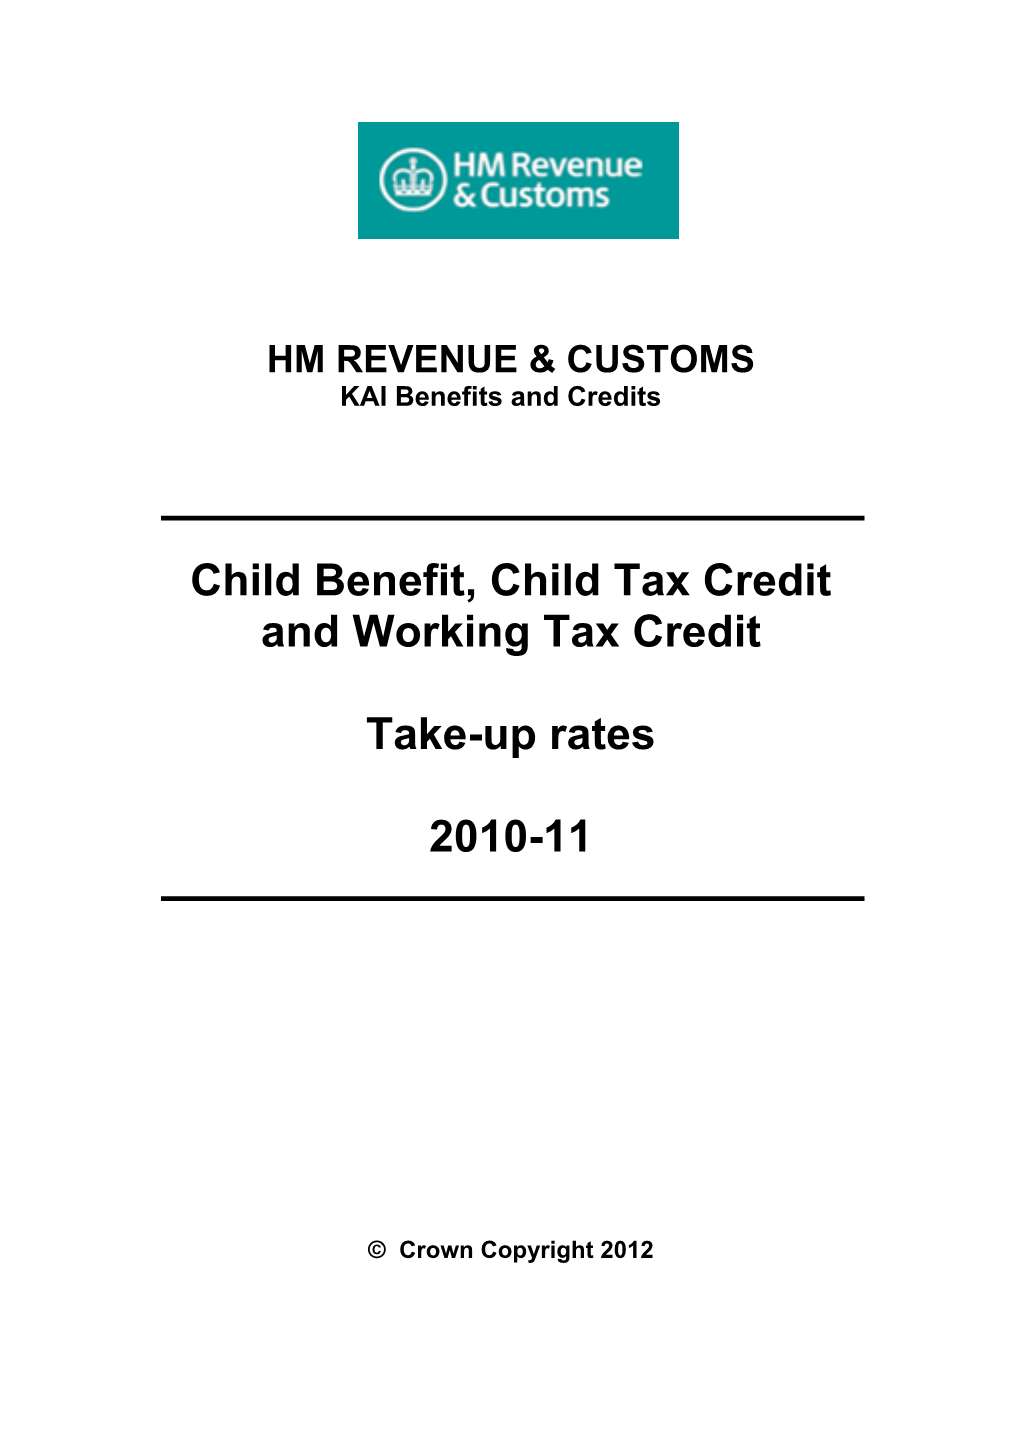 Child Tax Credit and Working Tax Credit